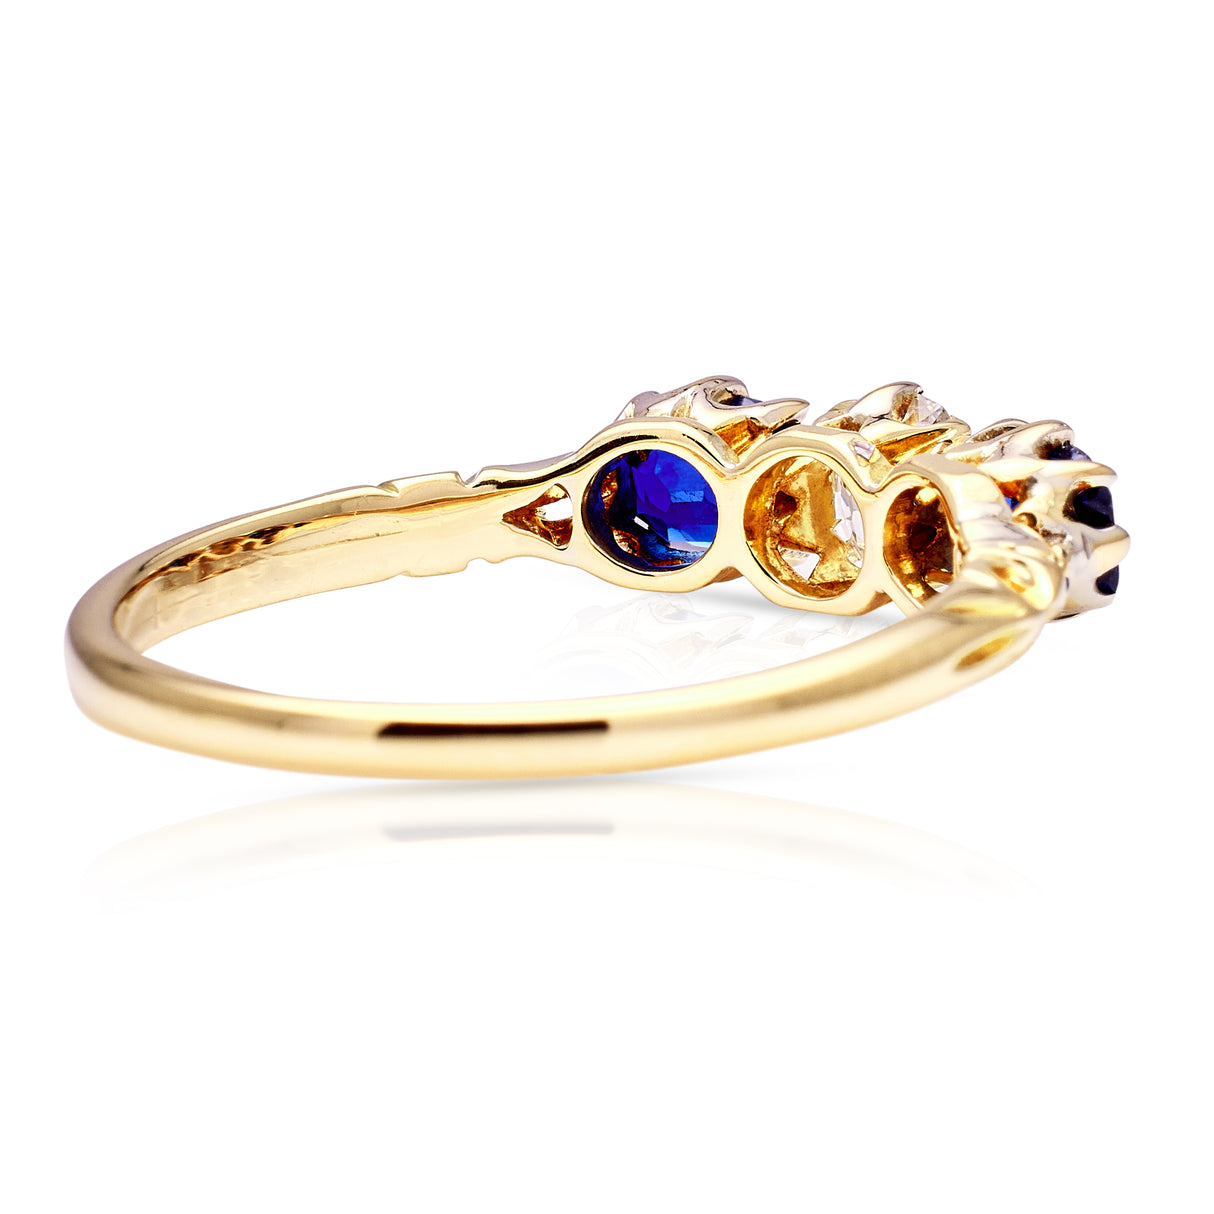 Antique, Edwardian Diamond and Sapphire Engagement Ring, 18ct Yellow Gold rear view